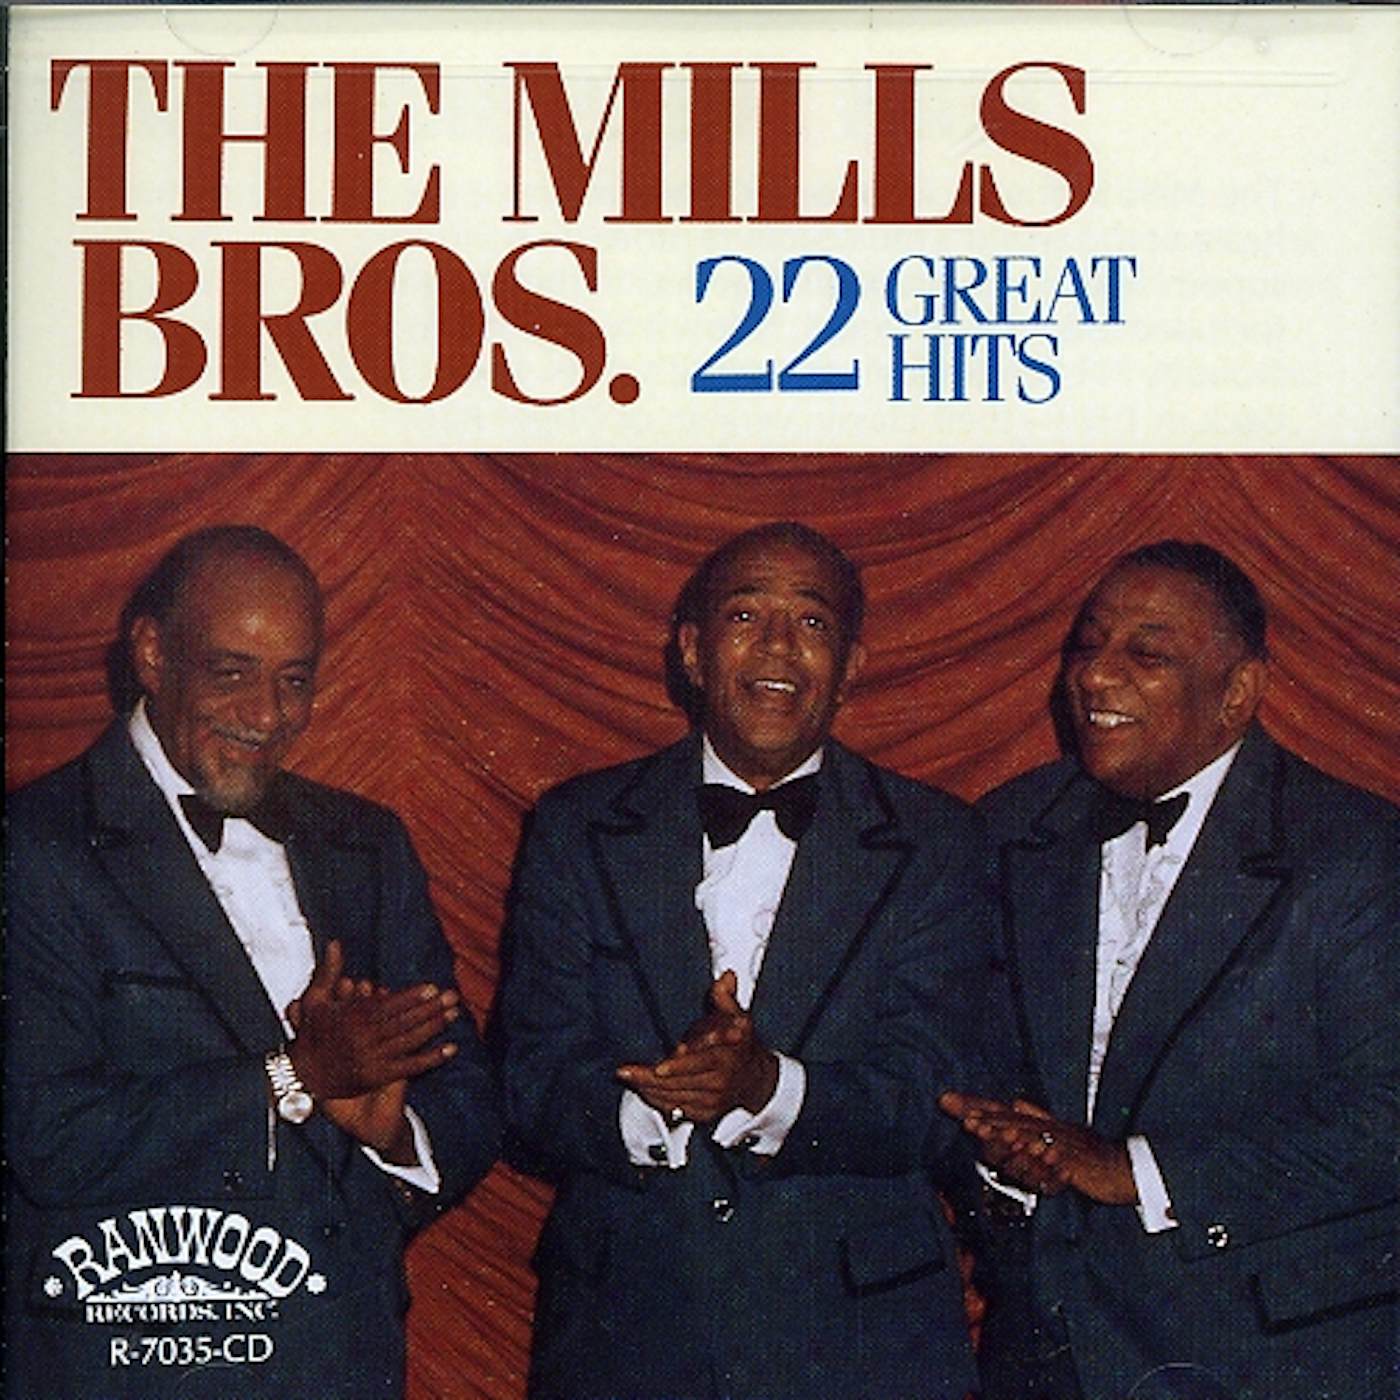 The Mills Brothers 22 GREAT HITS CD